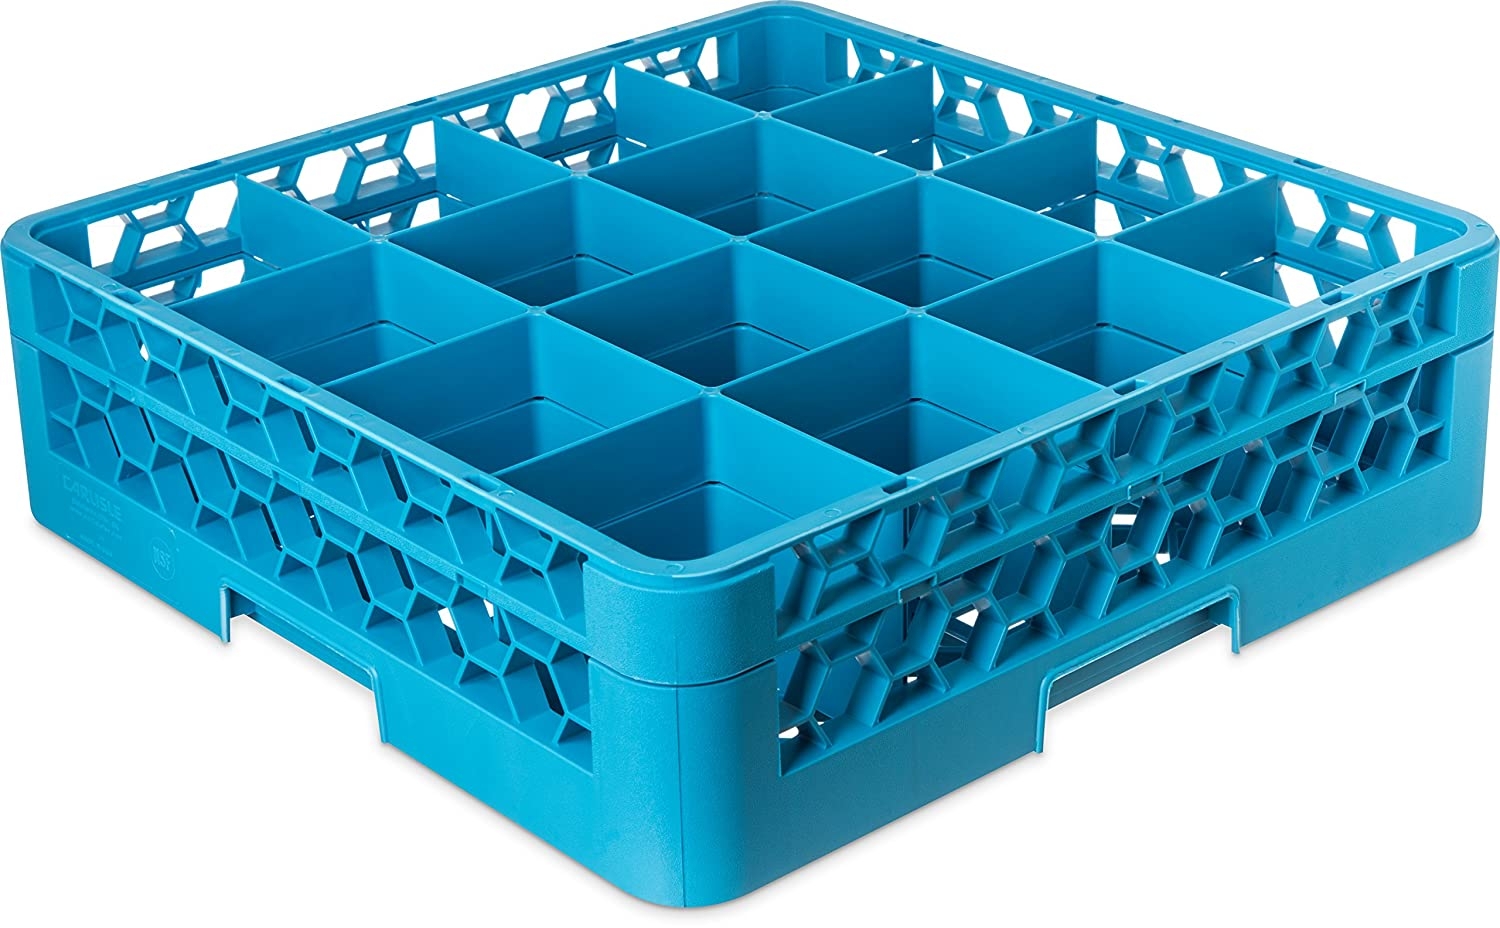 CFS OptiClean Plastic 25-Compartment Divided Glass Rack, Blue, (Pack of 2) Import To Shop ×Product customization General